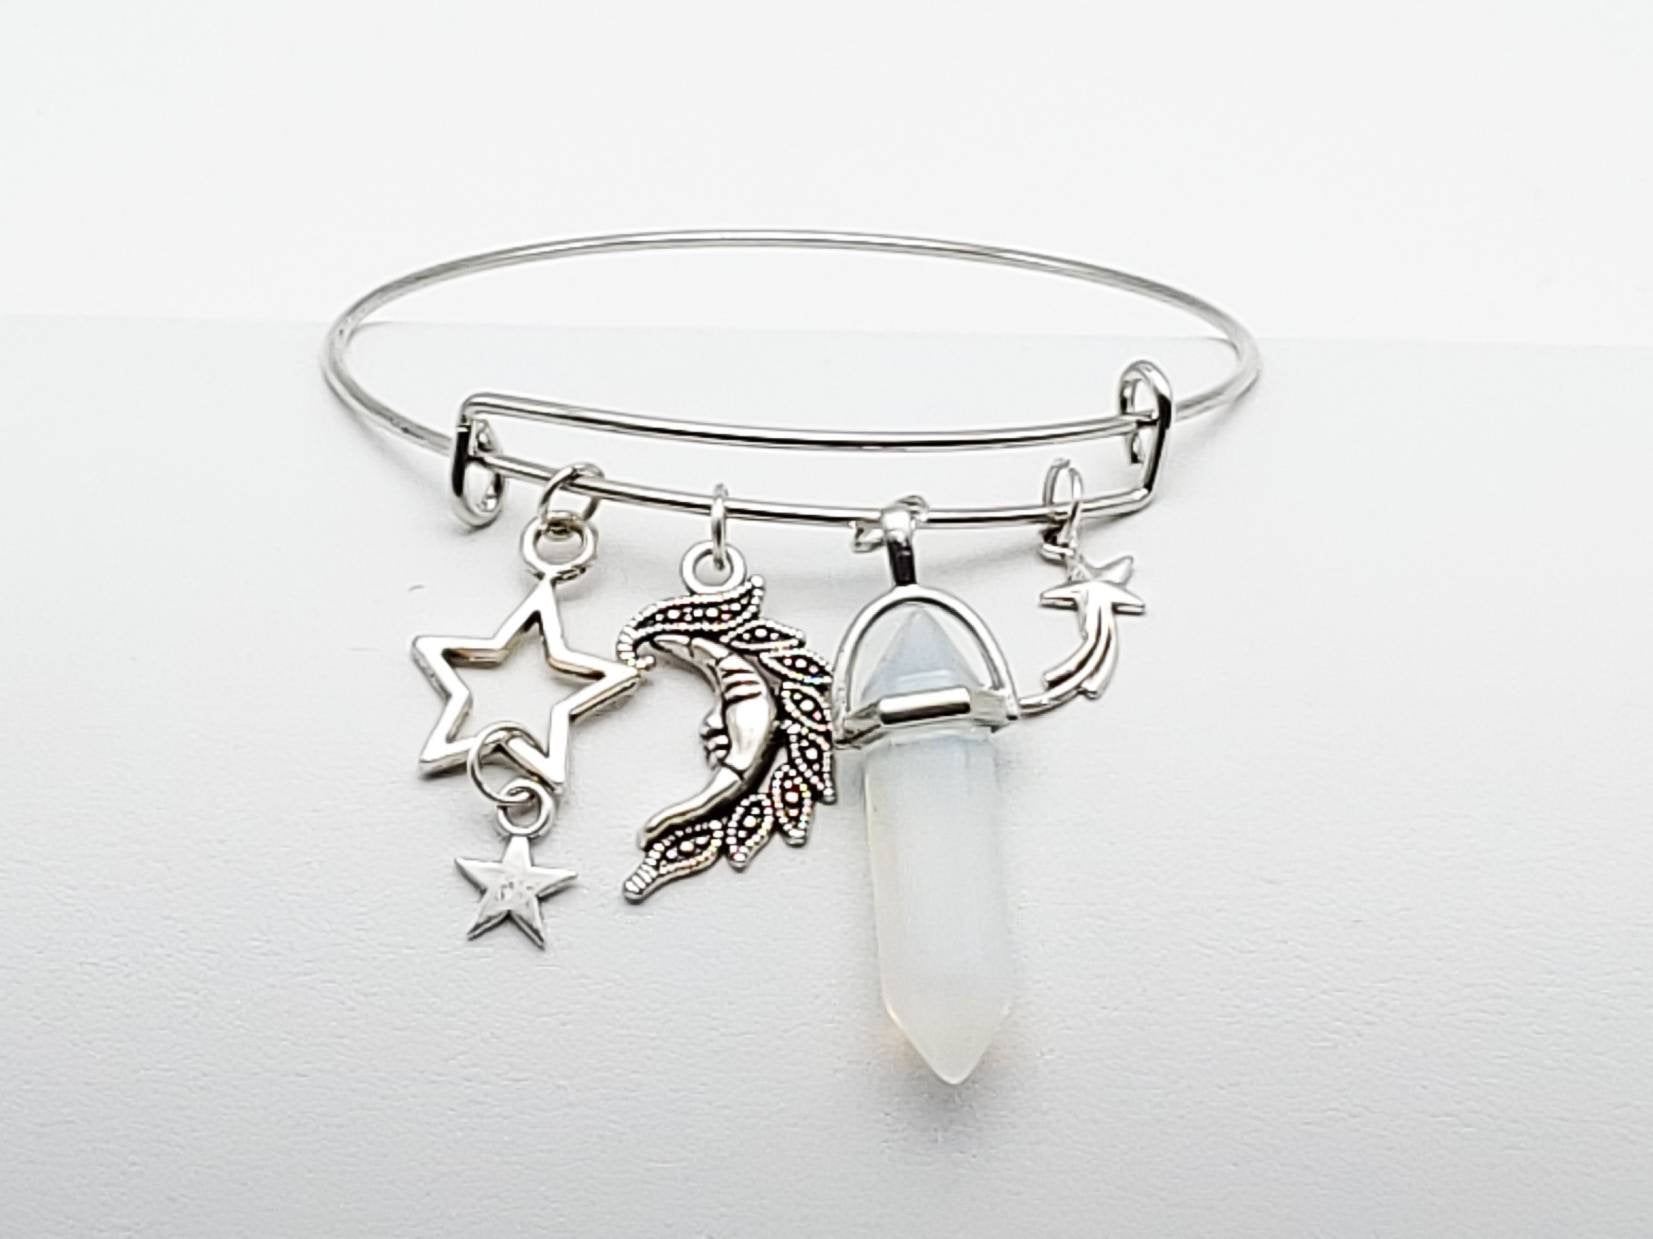 Charm Bangle with Moon and Star Charms and Opalite/Opaline Crystal - The Caffeinated Raven